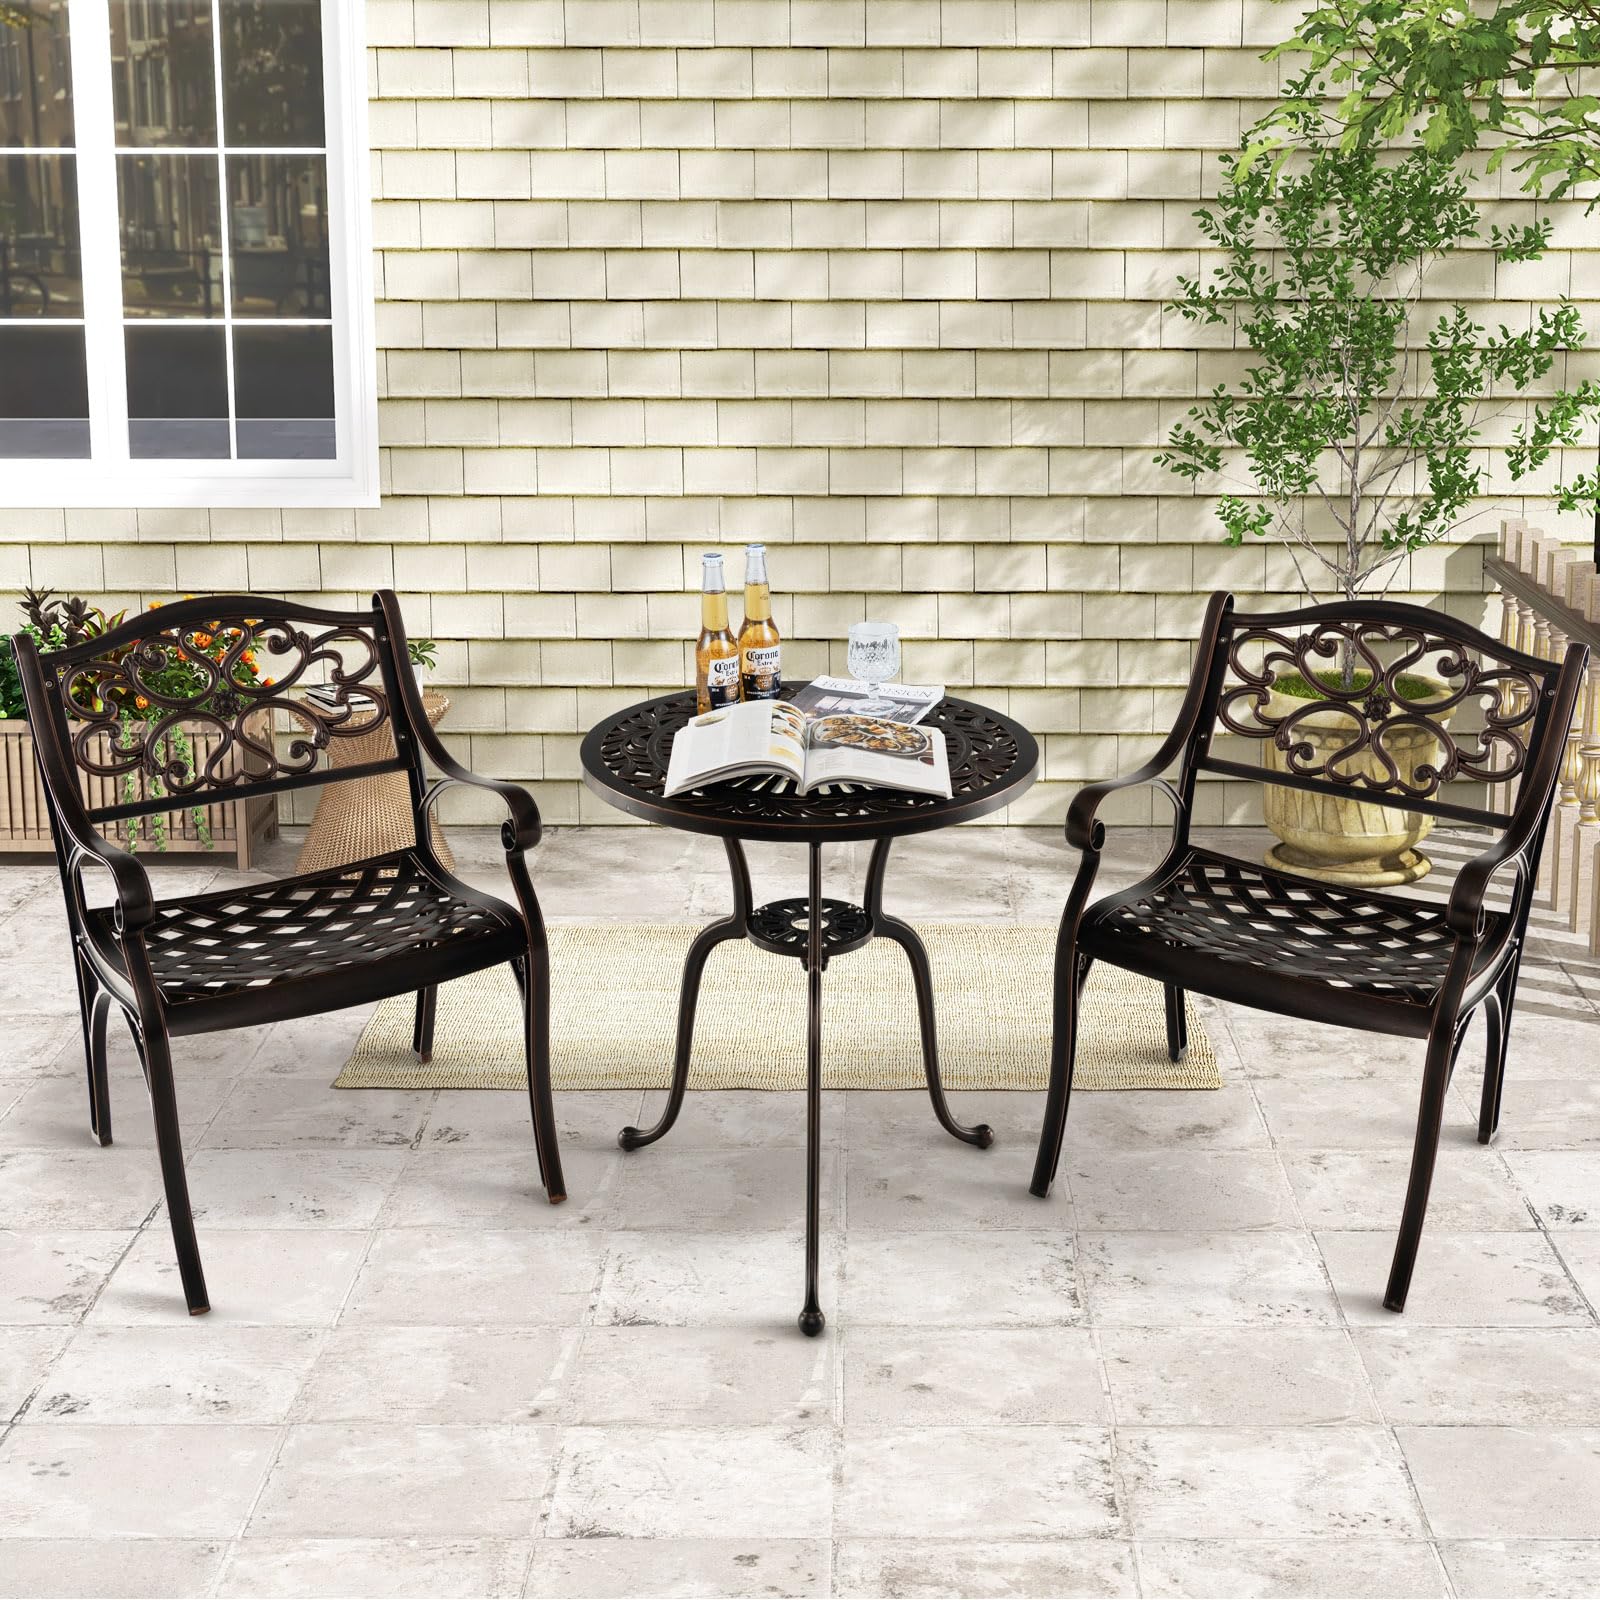 Giantex Cast Aluminum Patio Chairs Set of 2, All Weather Outdoor Dining Chairs w/Armrests and Curved Seats